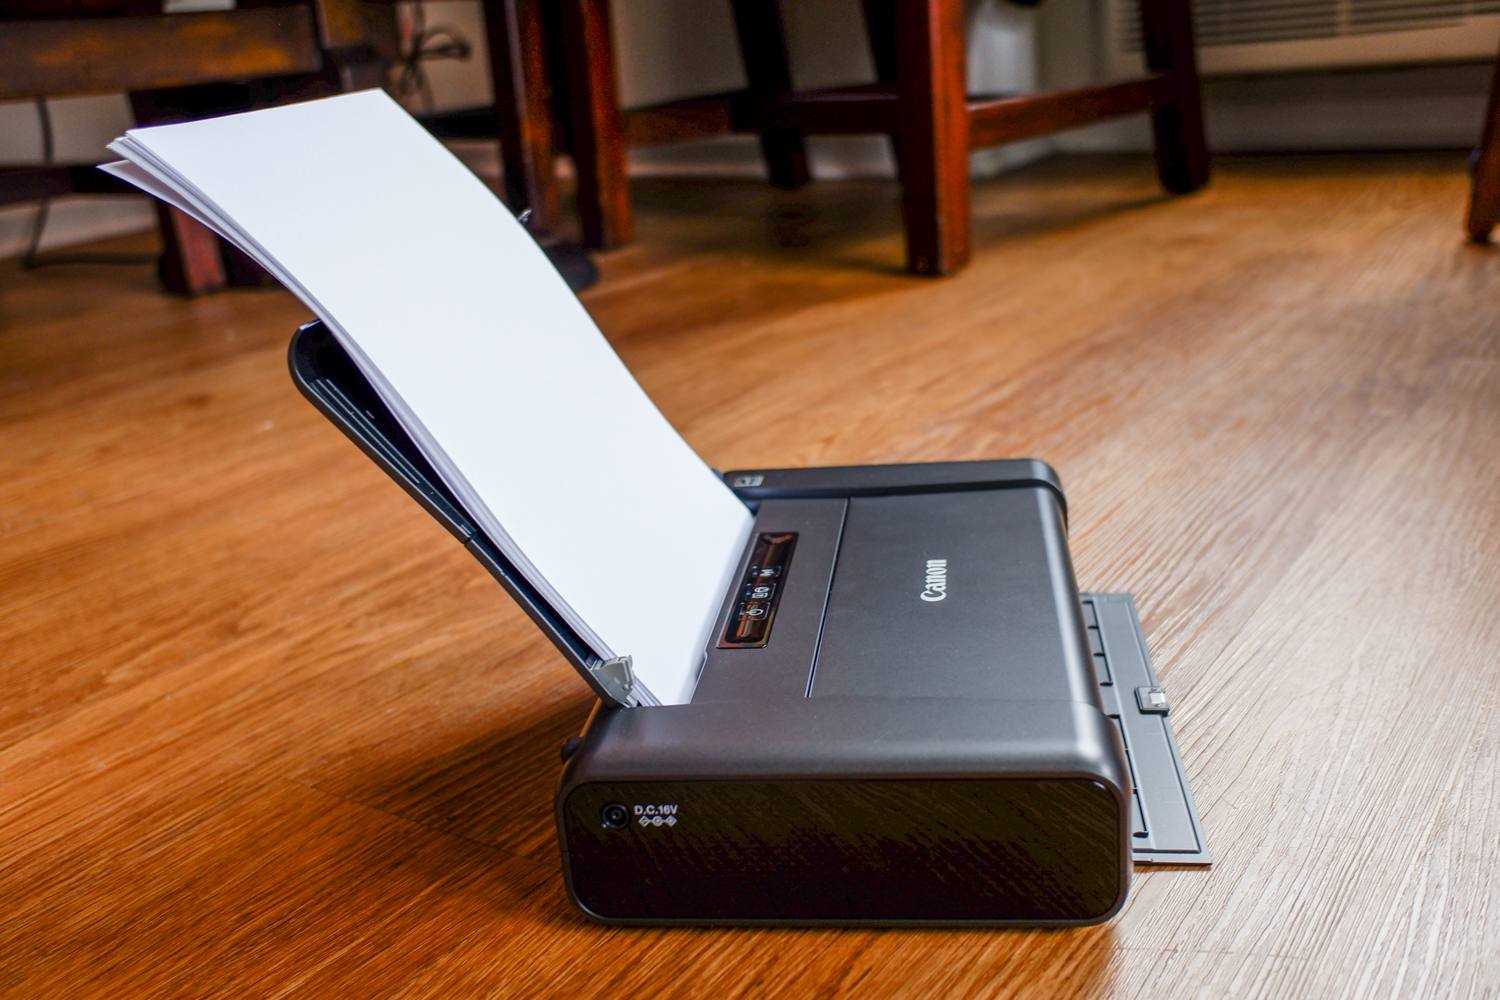 Are you finding the easy way to use mobile printer?